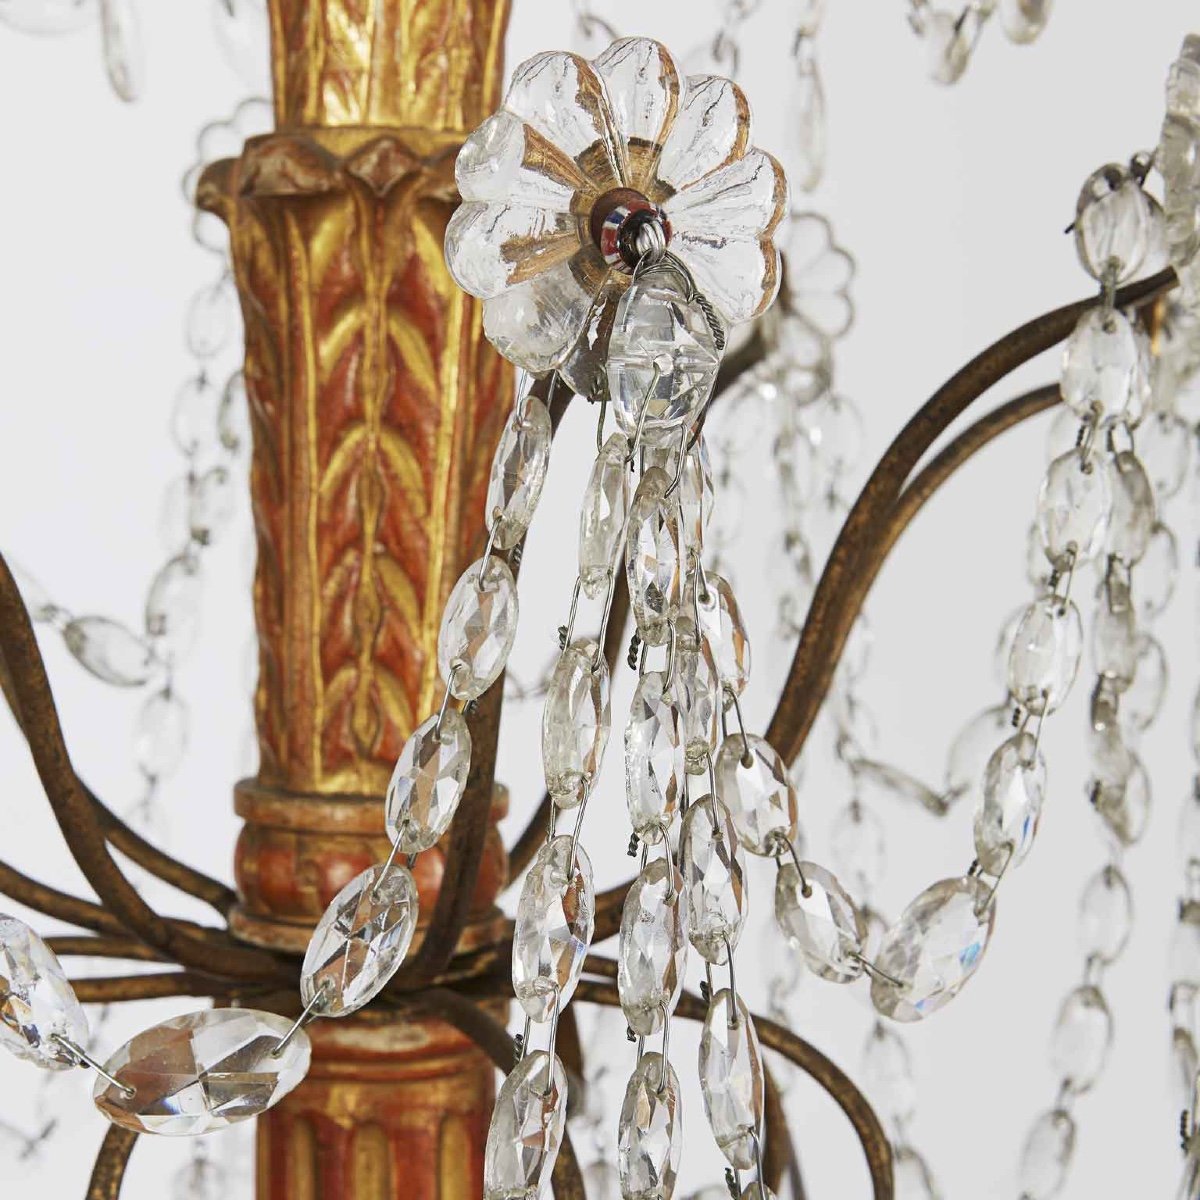 Louis XVI Genoese Chandelier In Gilded Wood And Crystals End 1700 Eight Lights -photo-3